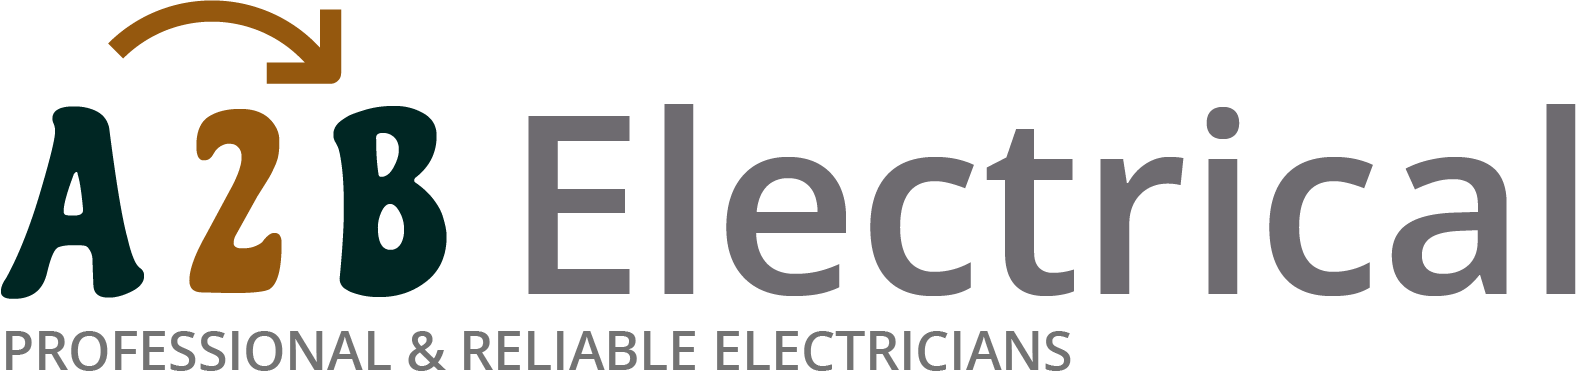 If you have electrical wiring problems in Lytham St Annes, we can provide an electrician to have a look for you. 